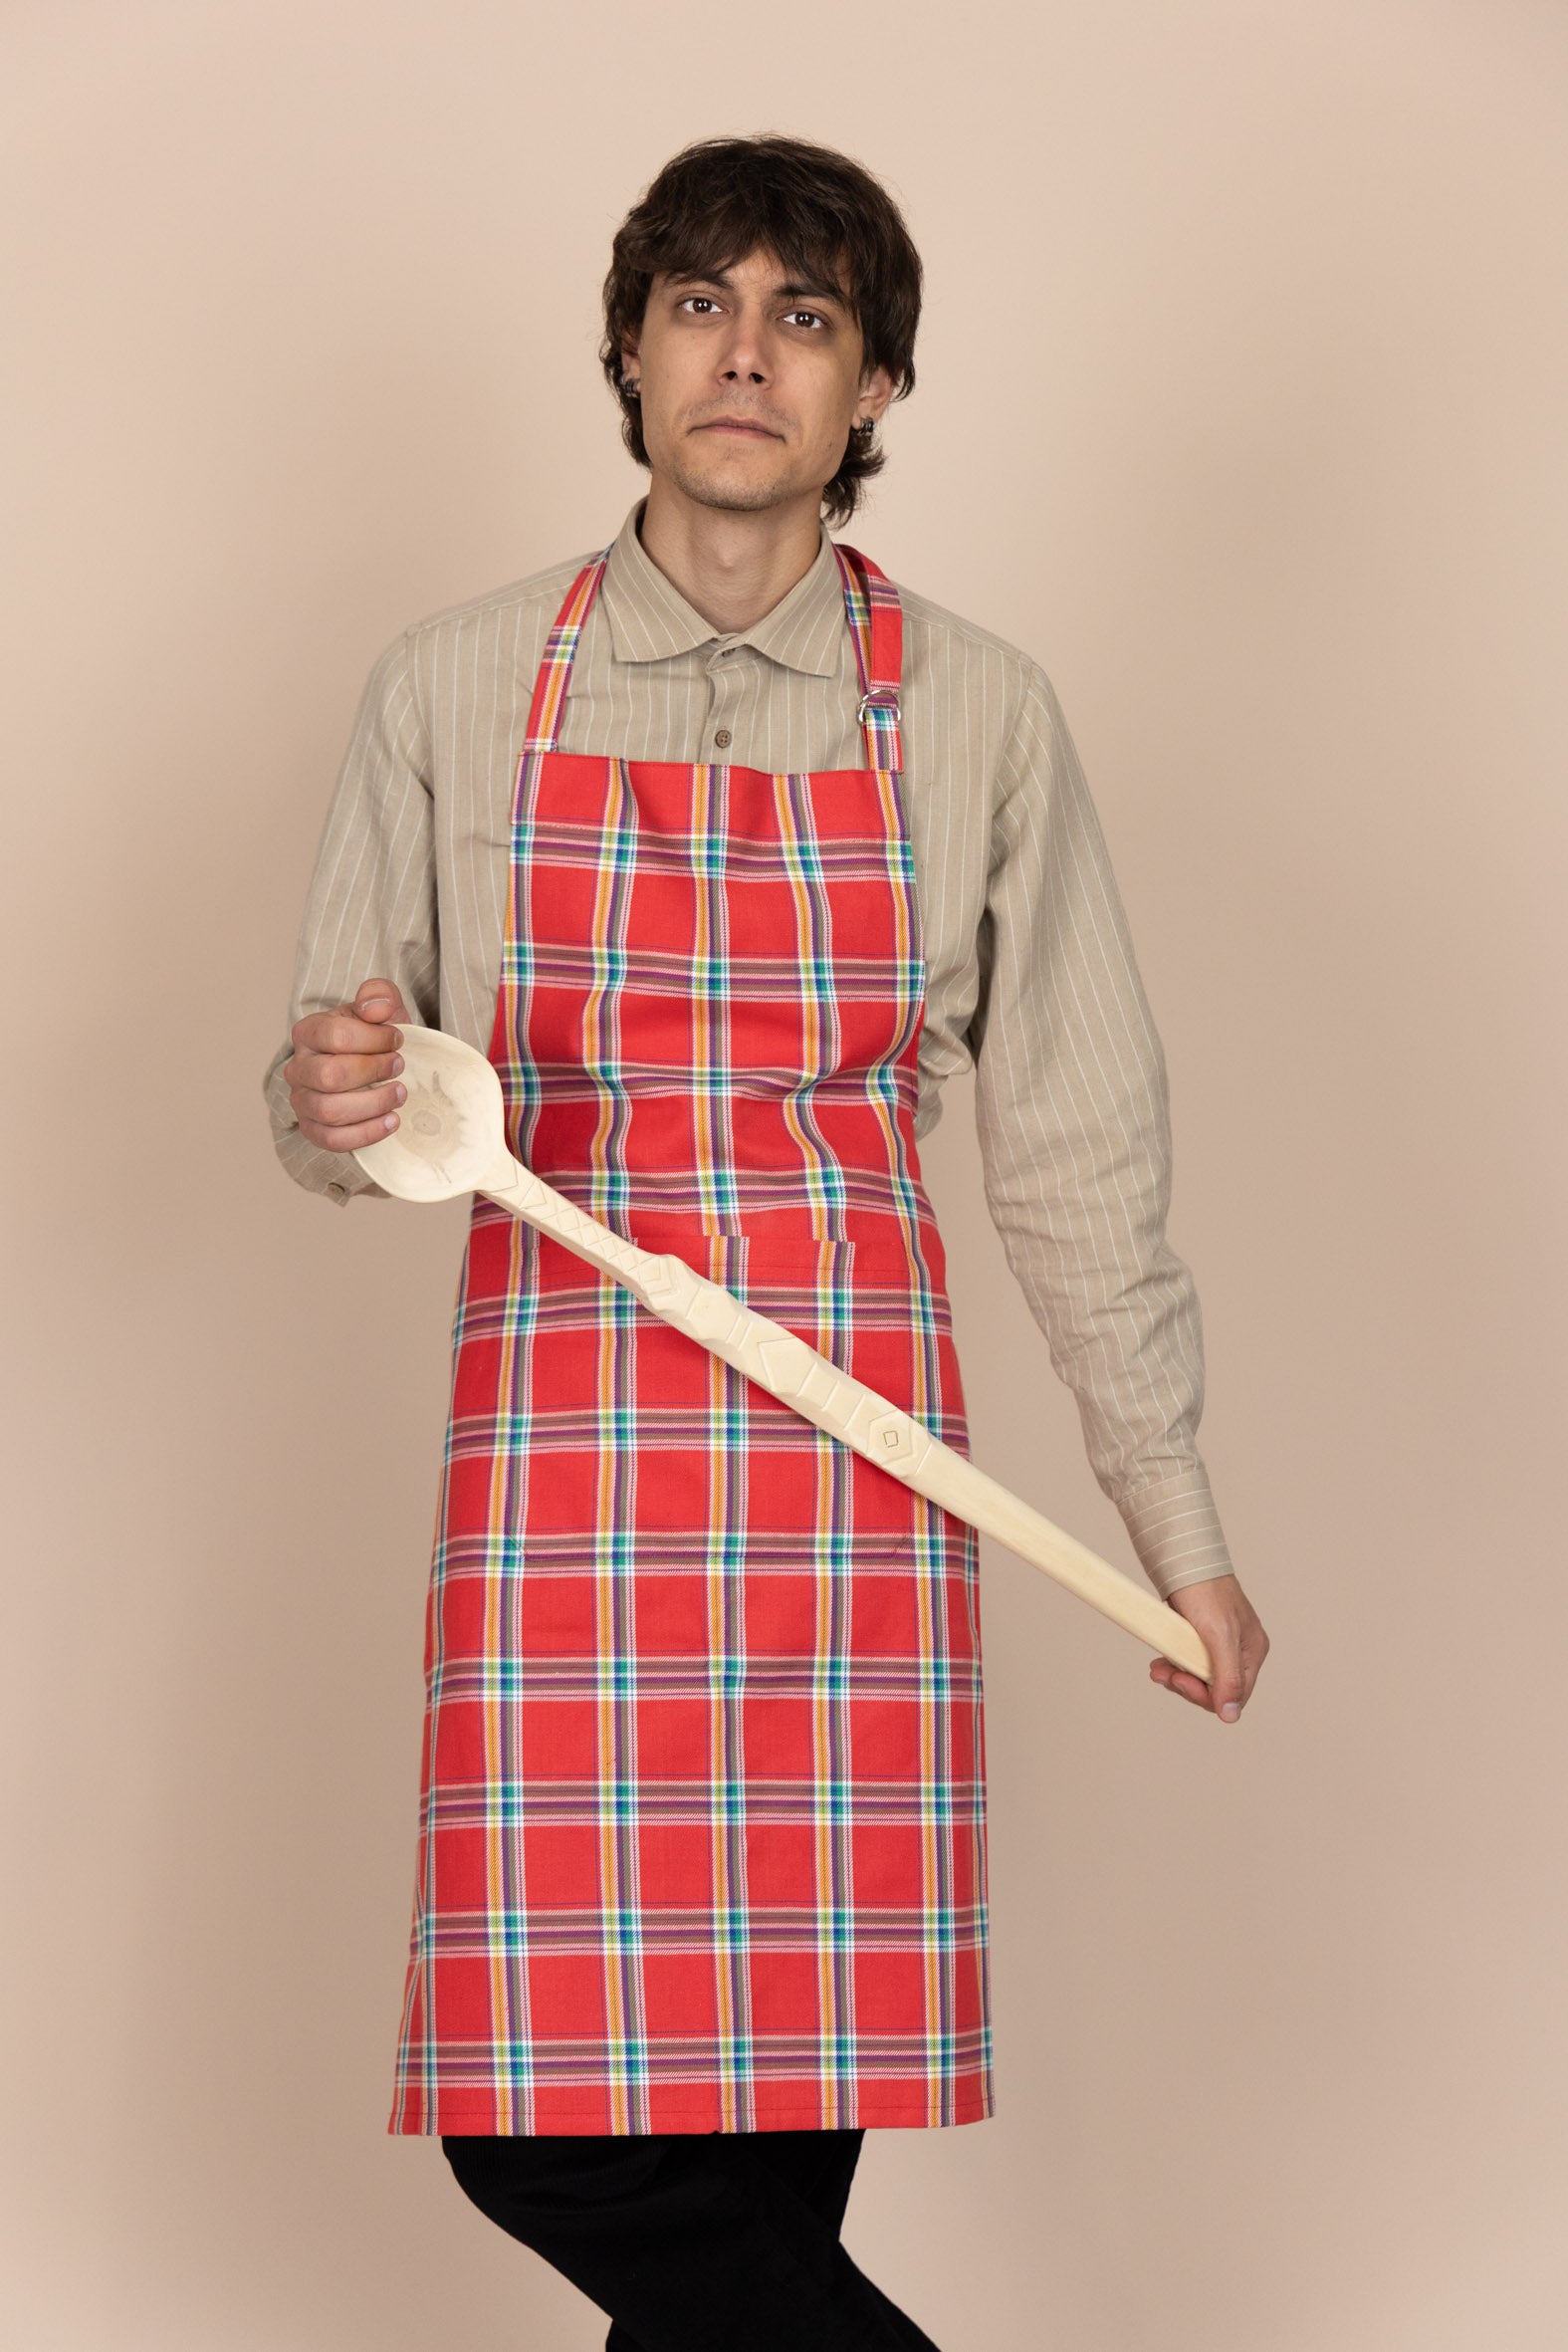 The Cotton Kitchen Aprons - Red